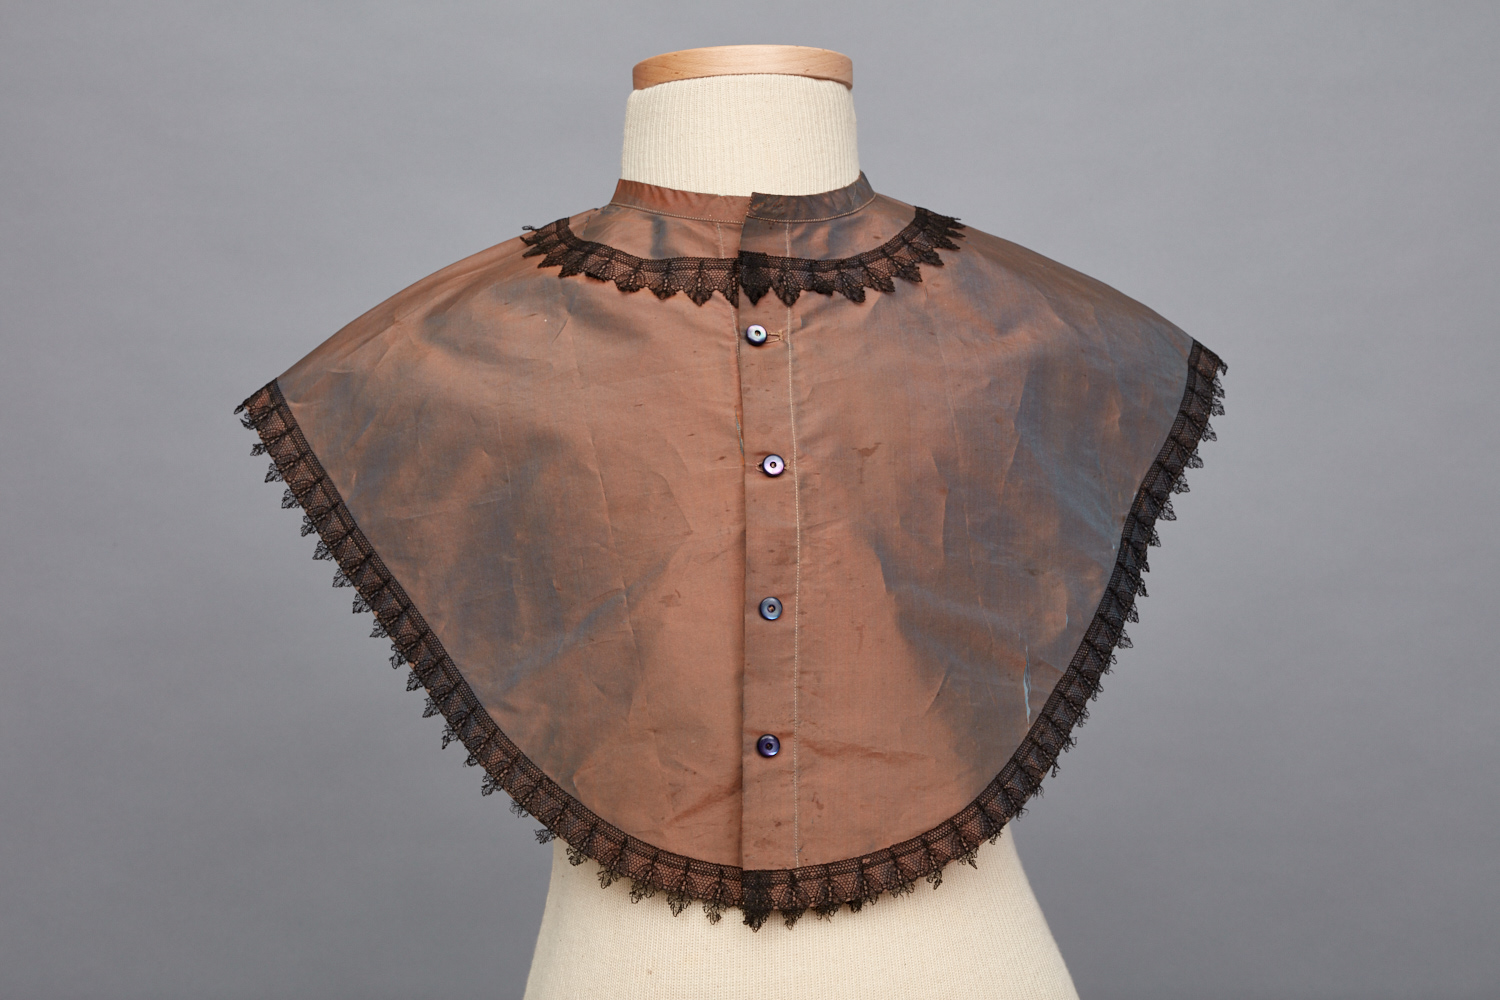 A brown shawl with black lace trim.